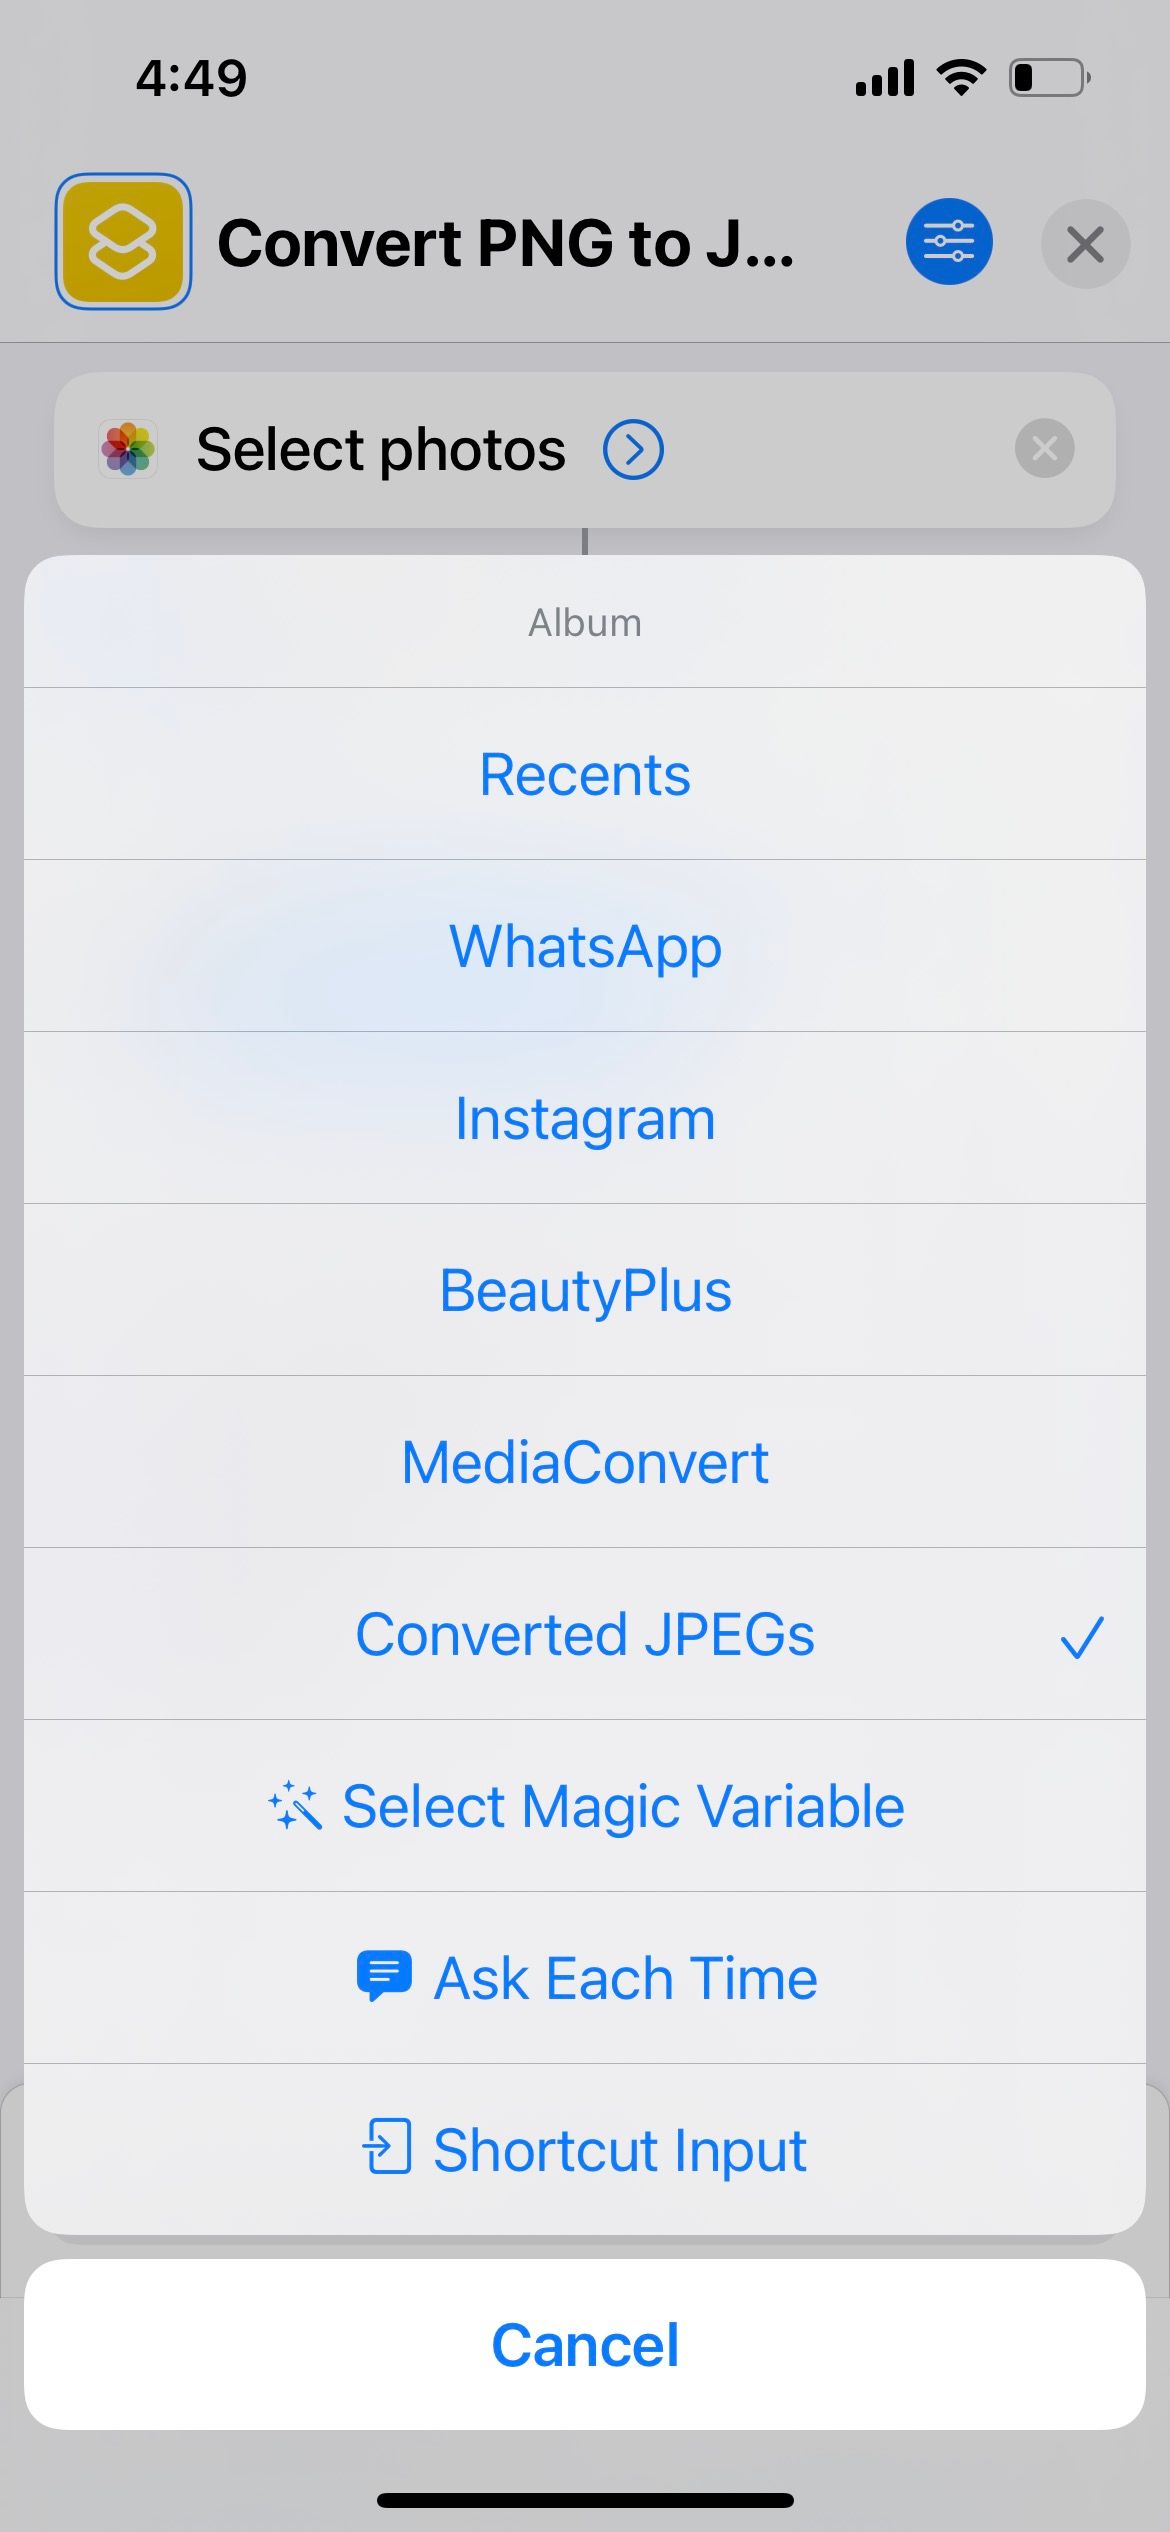 save photos to selected album in iphone shortcuts